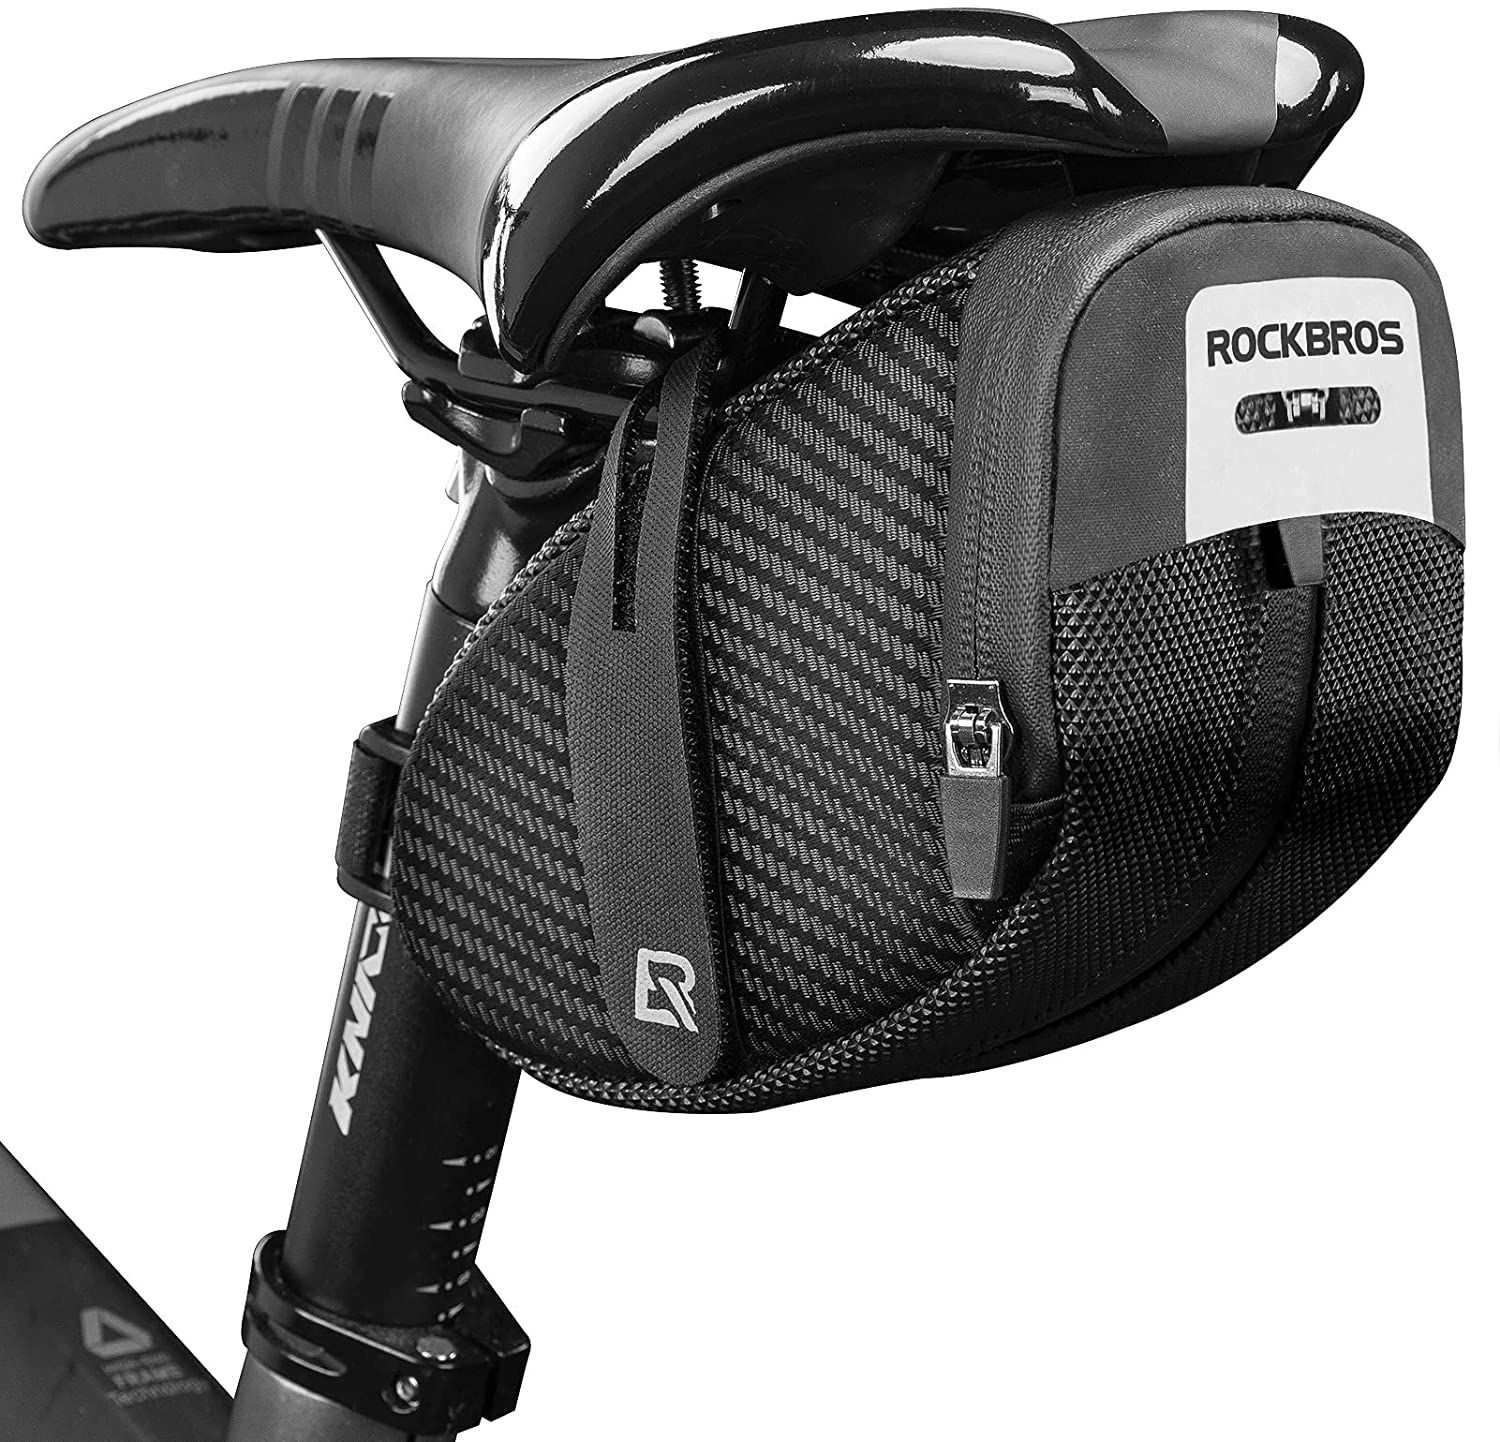 A saddlebag like this can be attached to your bike under the seat.